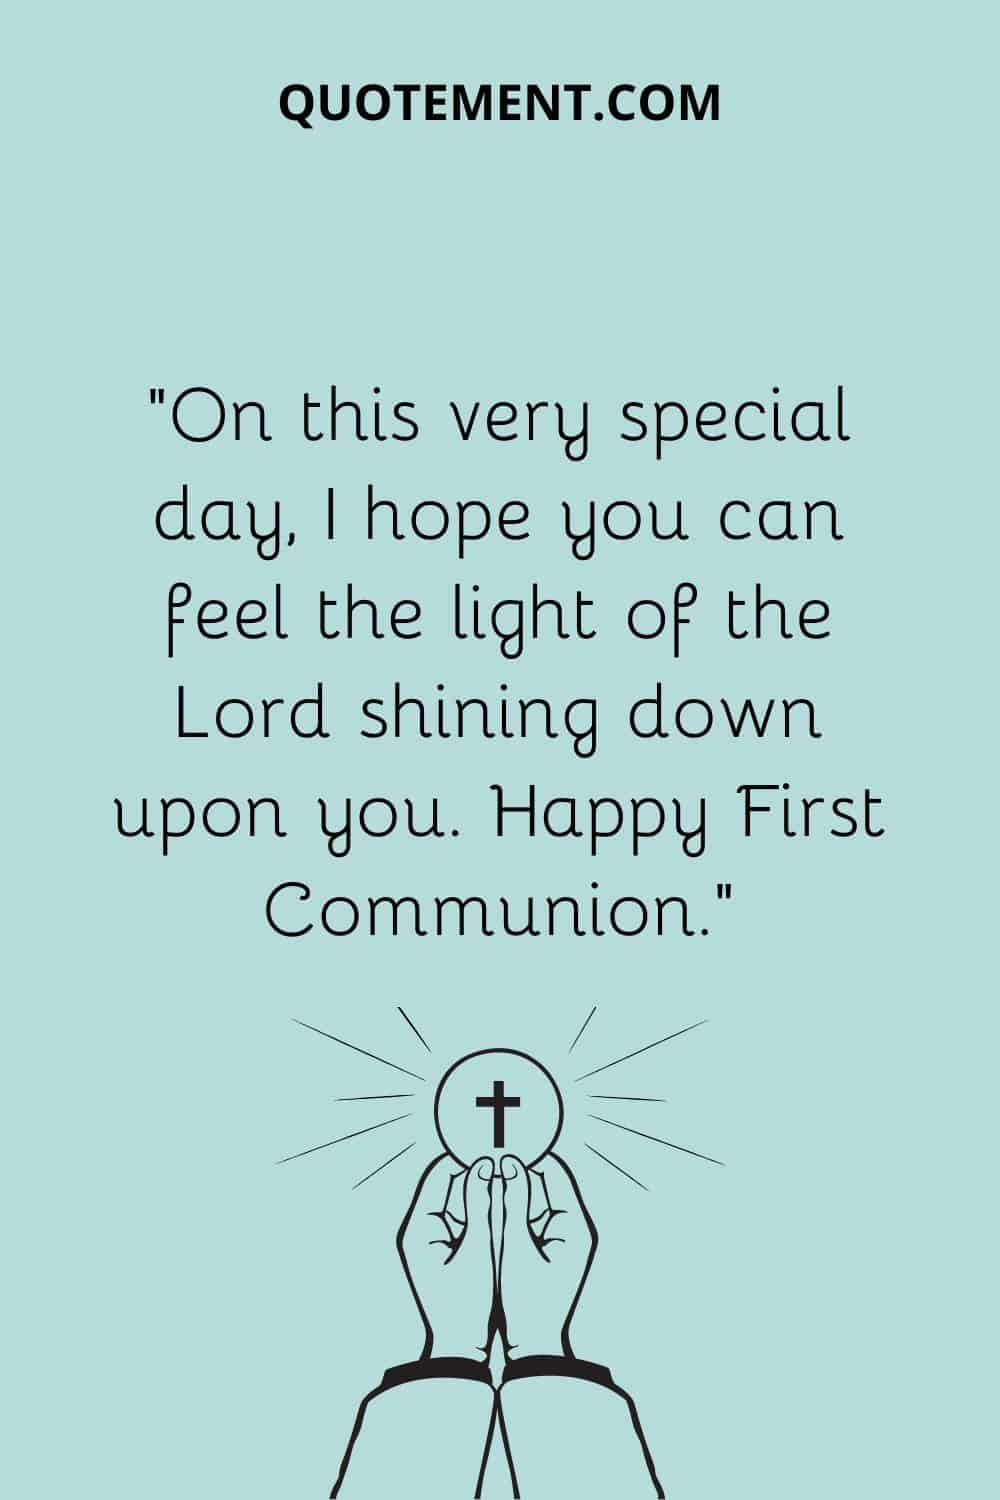 “On this very special day, I hope you can feel the light of the Lord shining down upon you. Happy First Communion.”